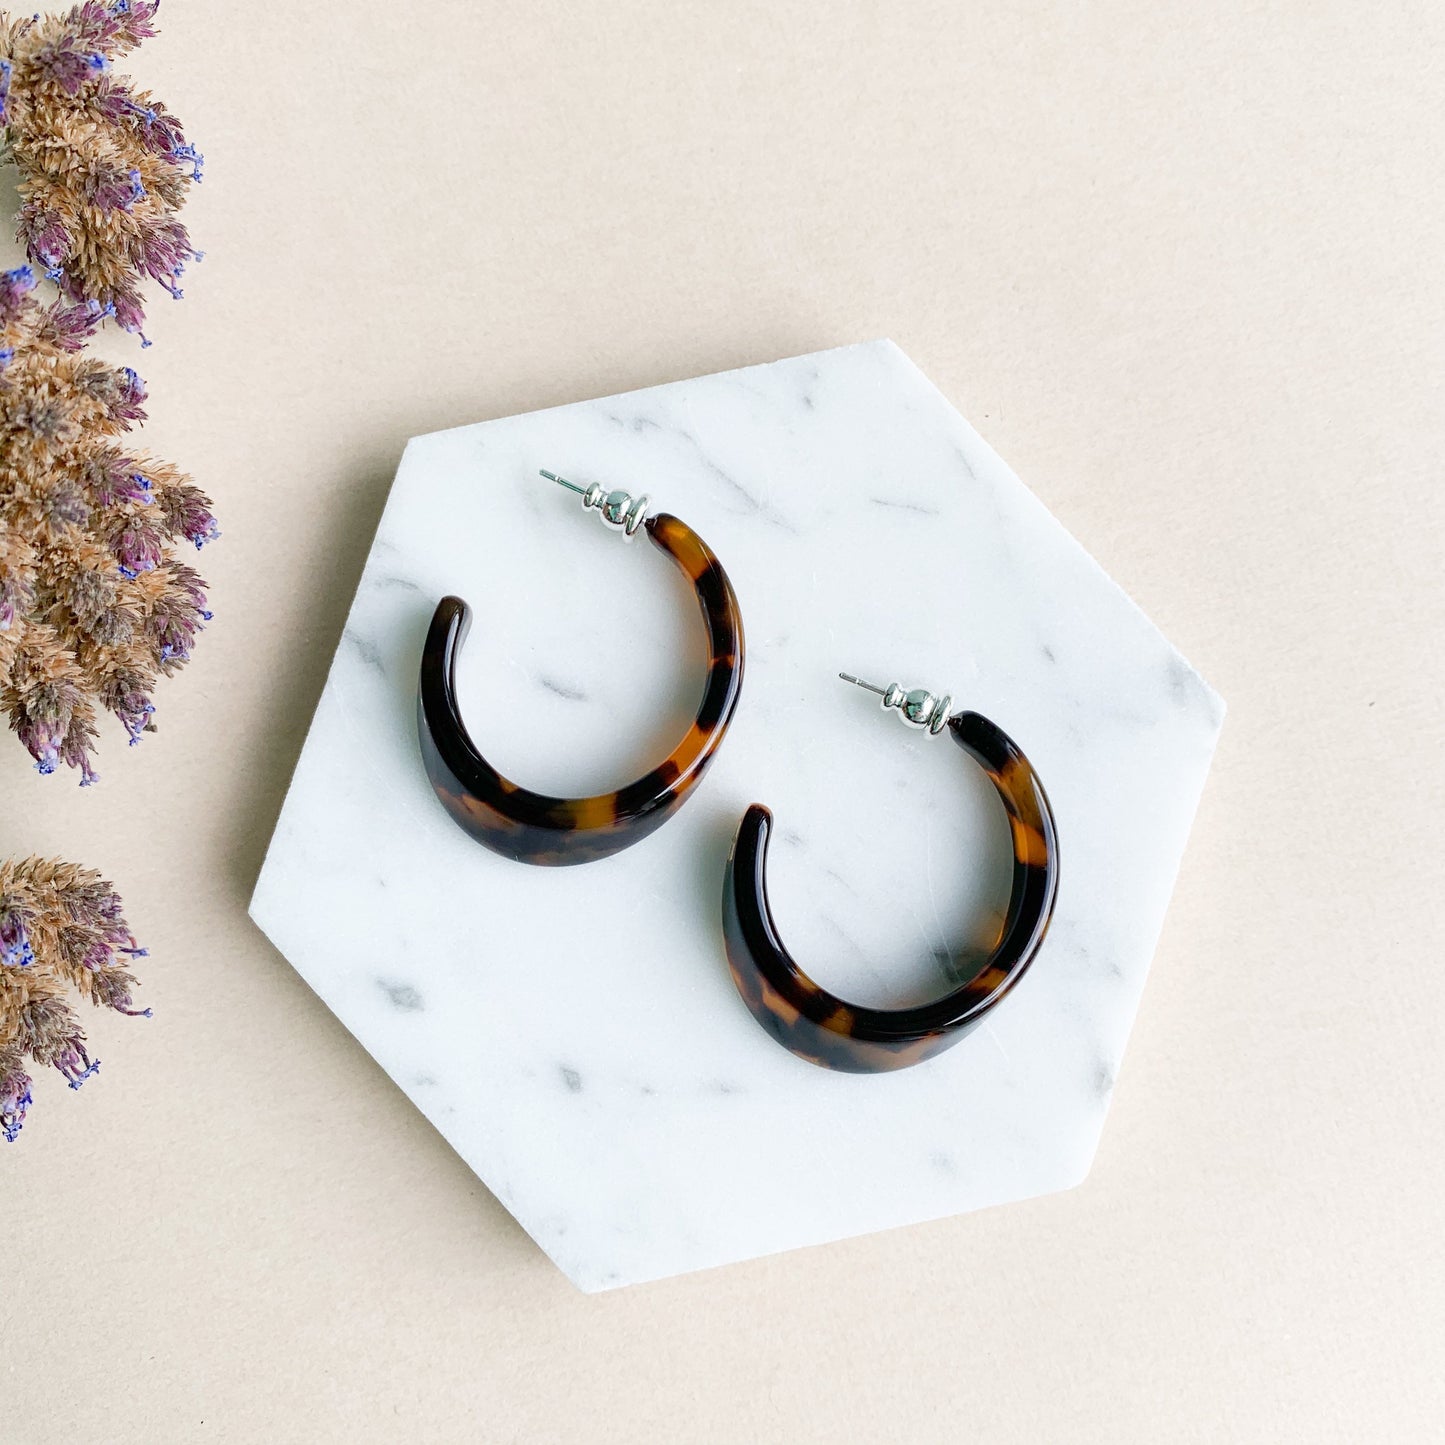 Illusion Hoops in Classic Tortoise | Tortoise Shell Acetate Resin Statement Hoop Earrings S925 Silver Posts